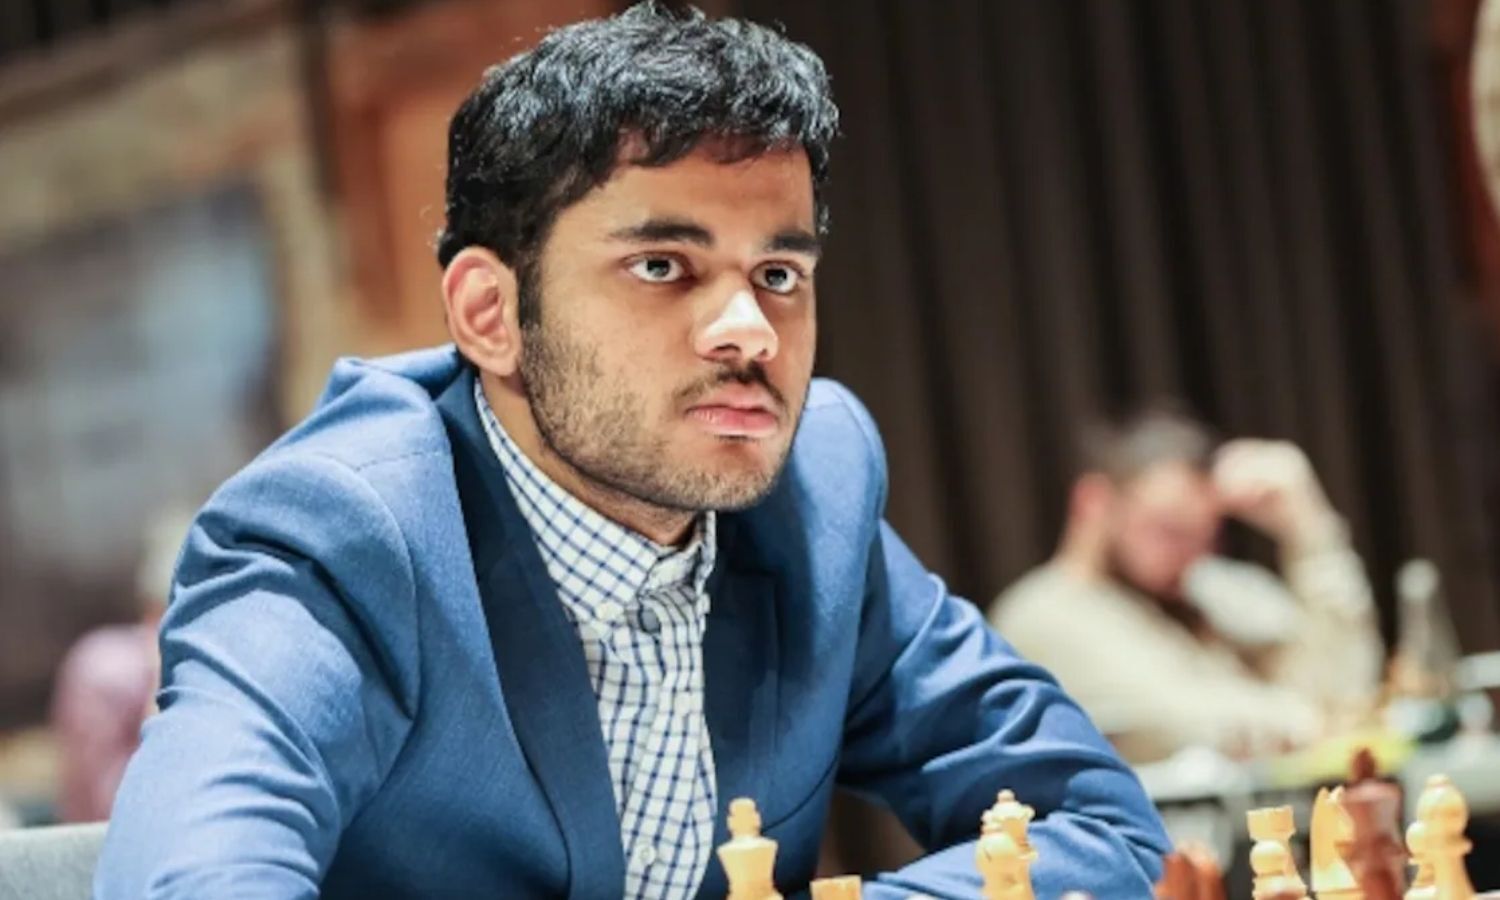 Yet another solid draw took place between Vidit Gujrathi and Ian